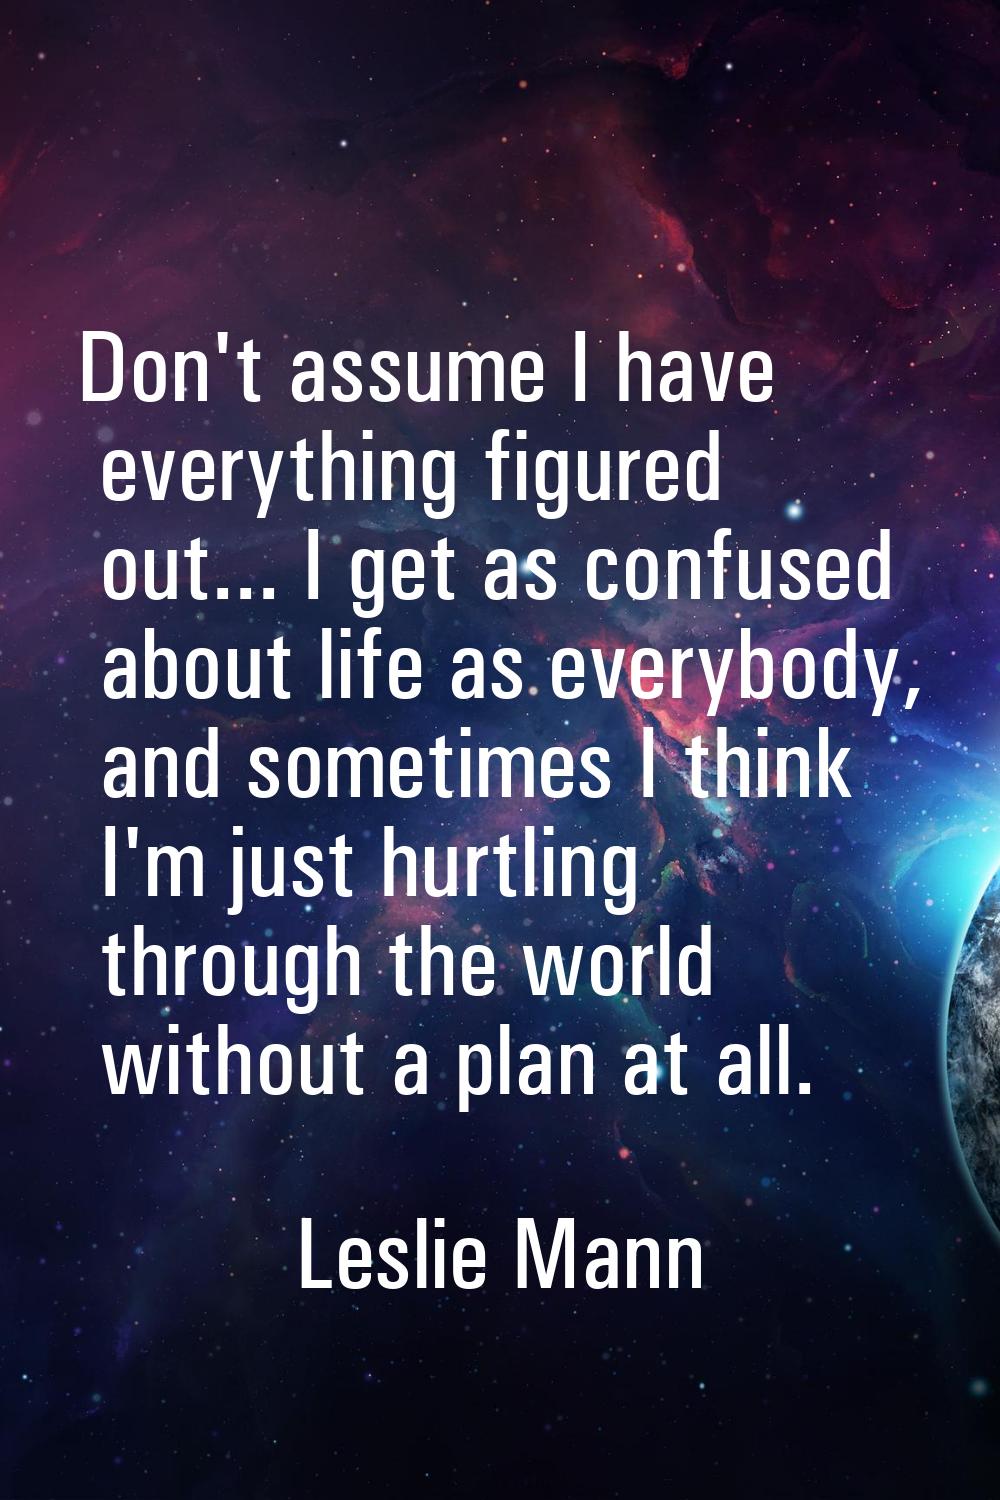 Don't assume I have everything figured out... I get as confused about life as everybody, and someti